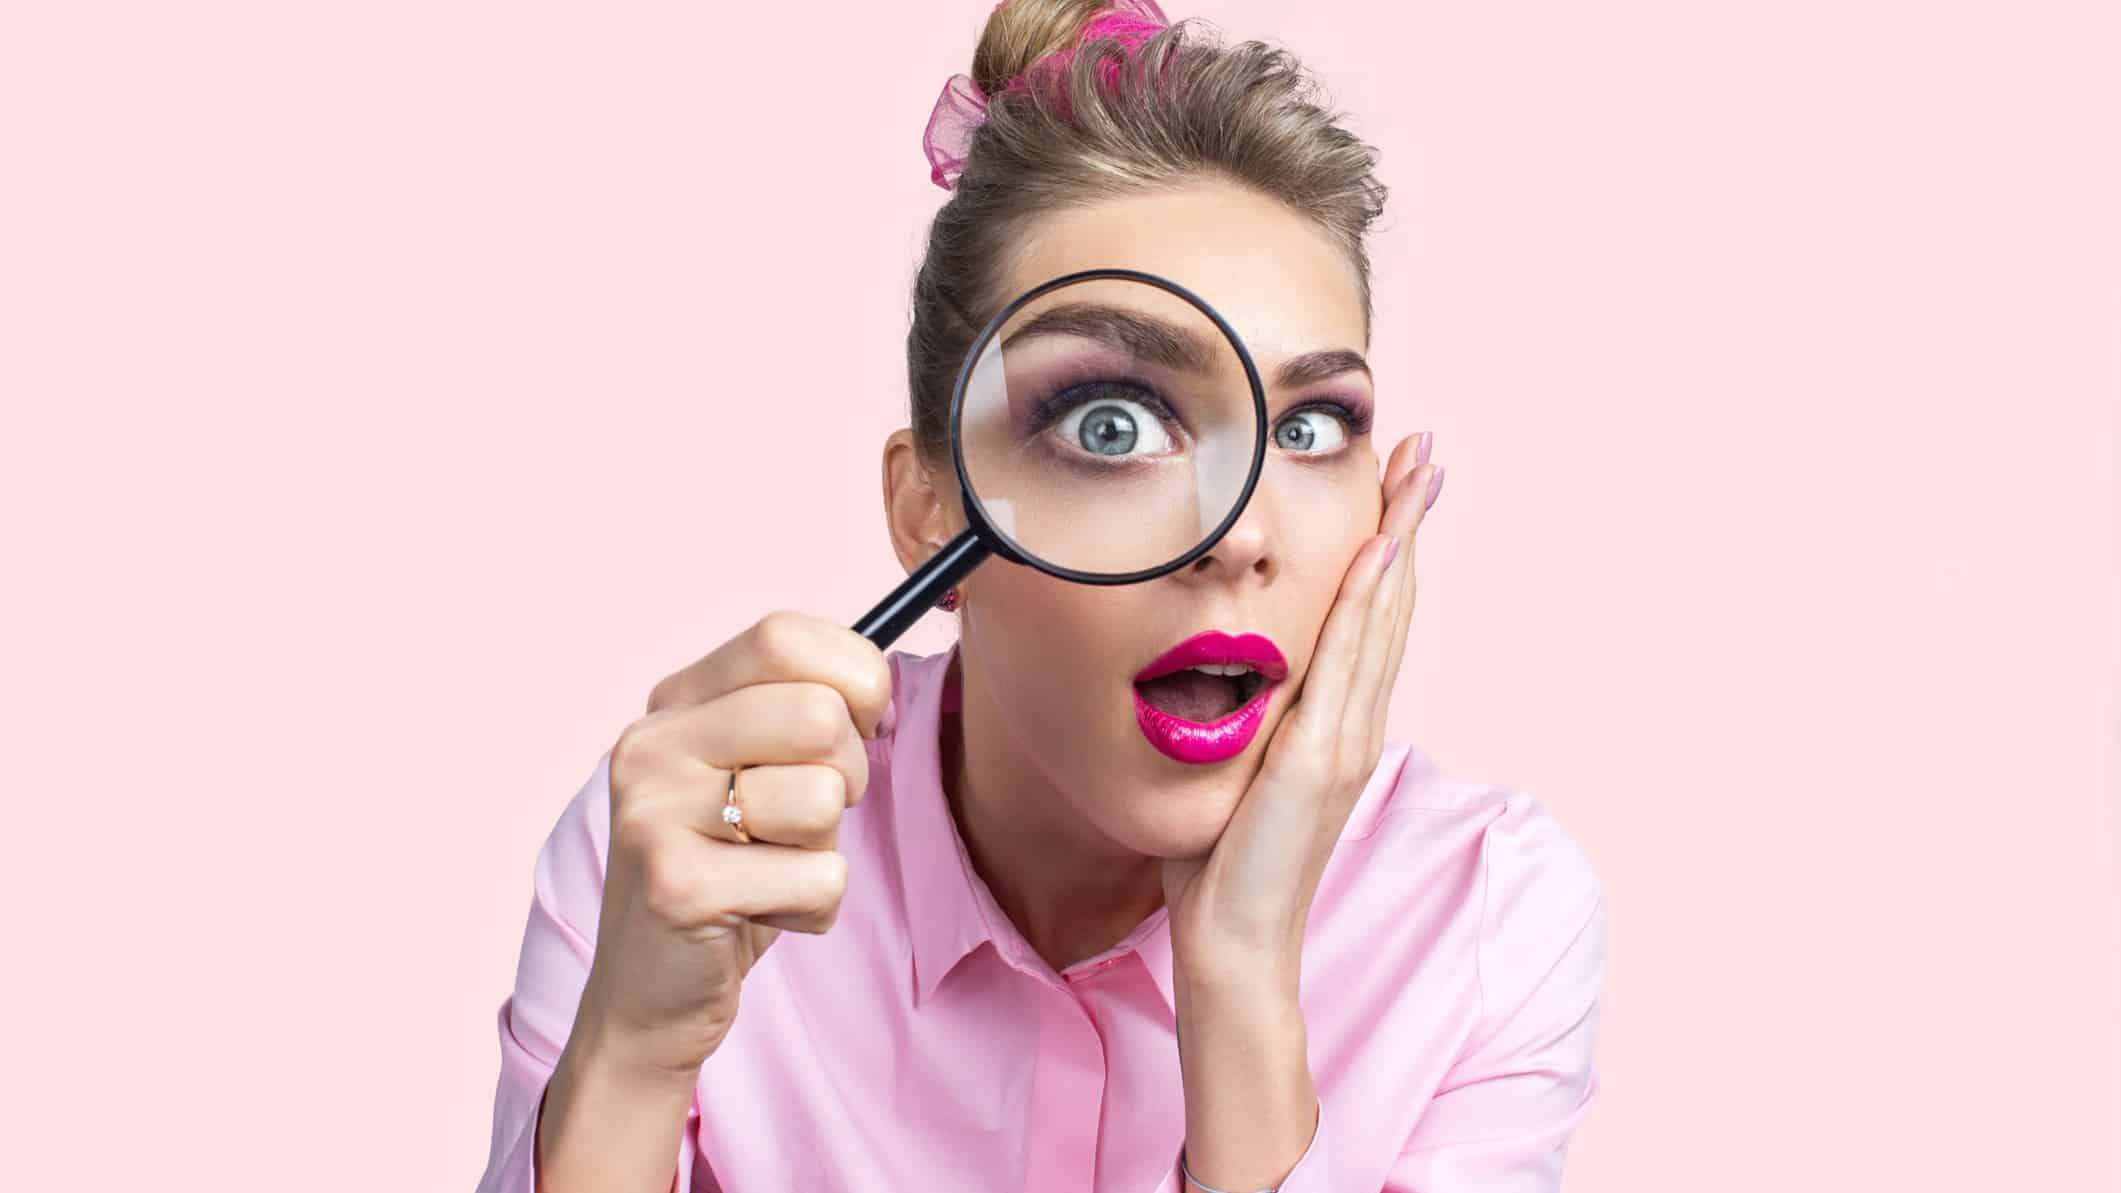 A female ASX investor looks through a magnifying glass that enlarges her eye and holds her hand to her face with her mouth open as if looking at something of great interest or surprise.